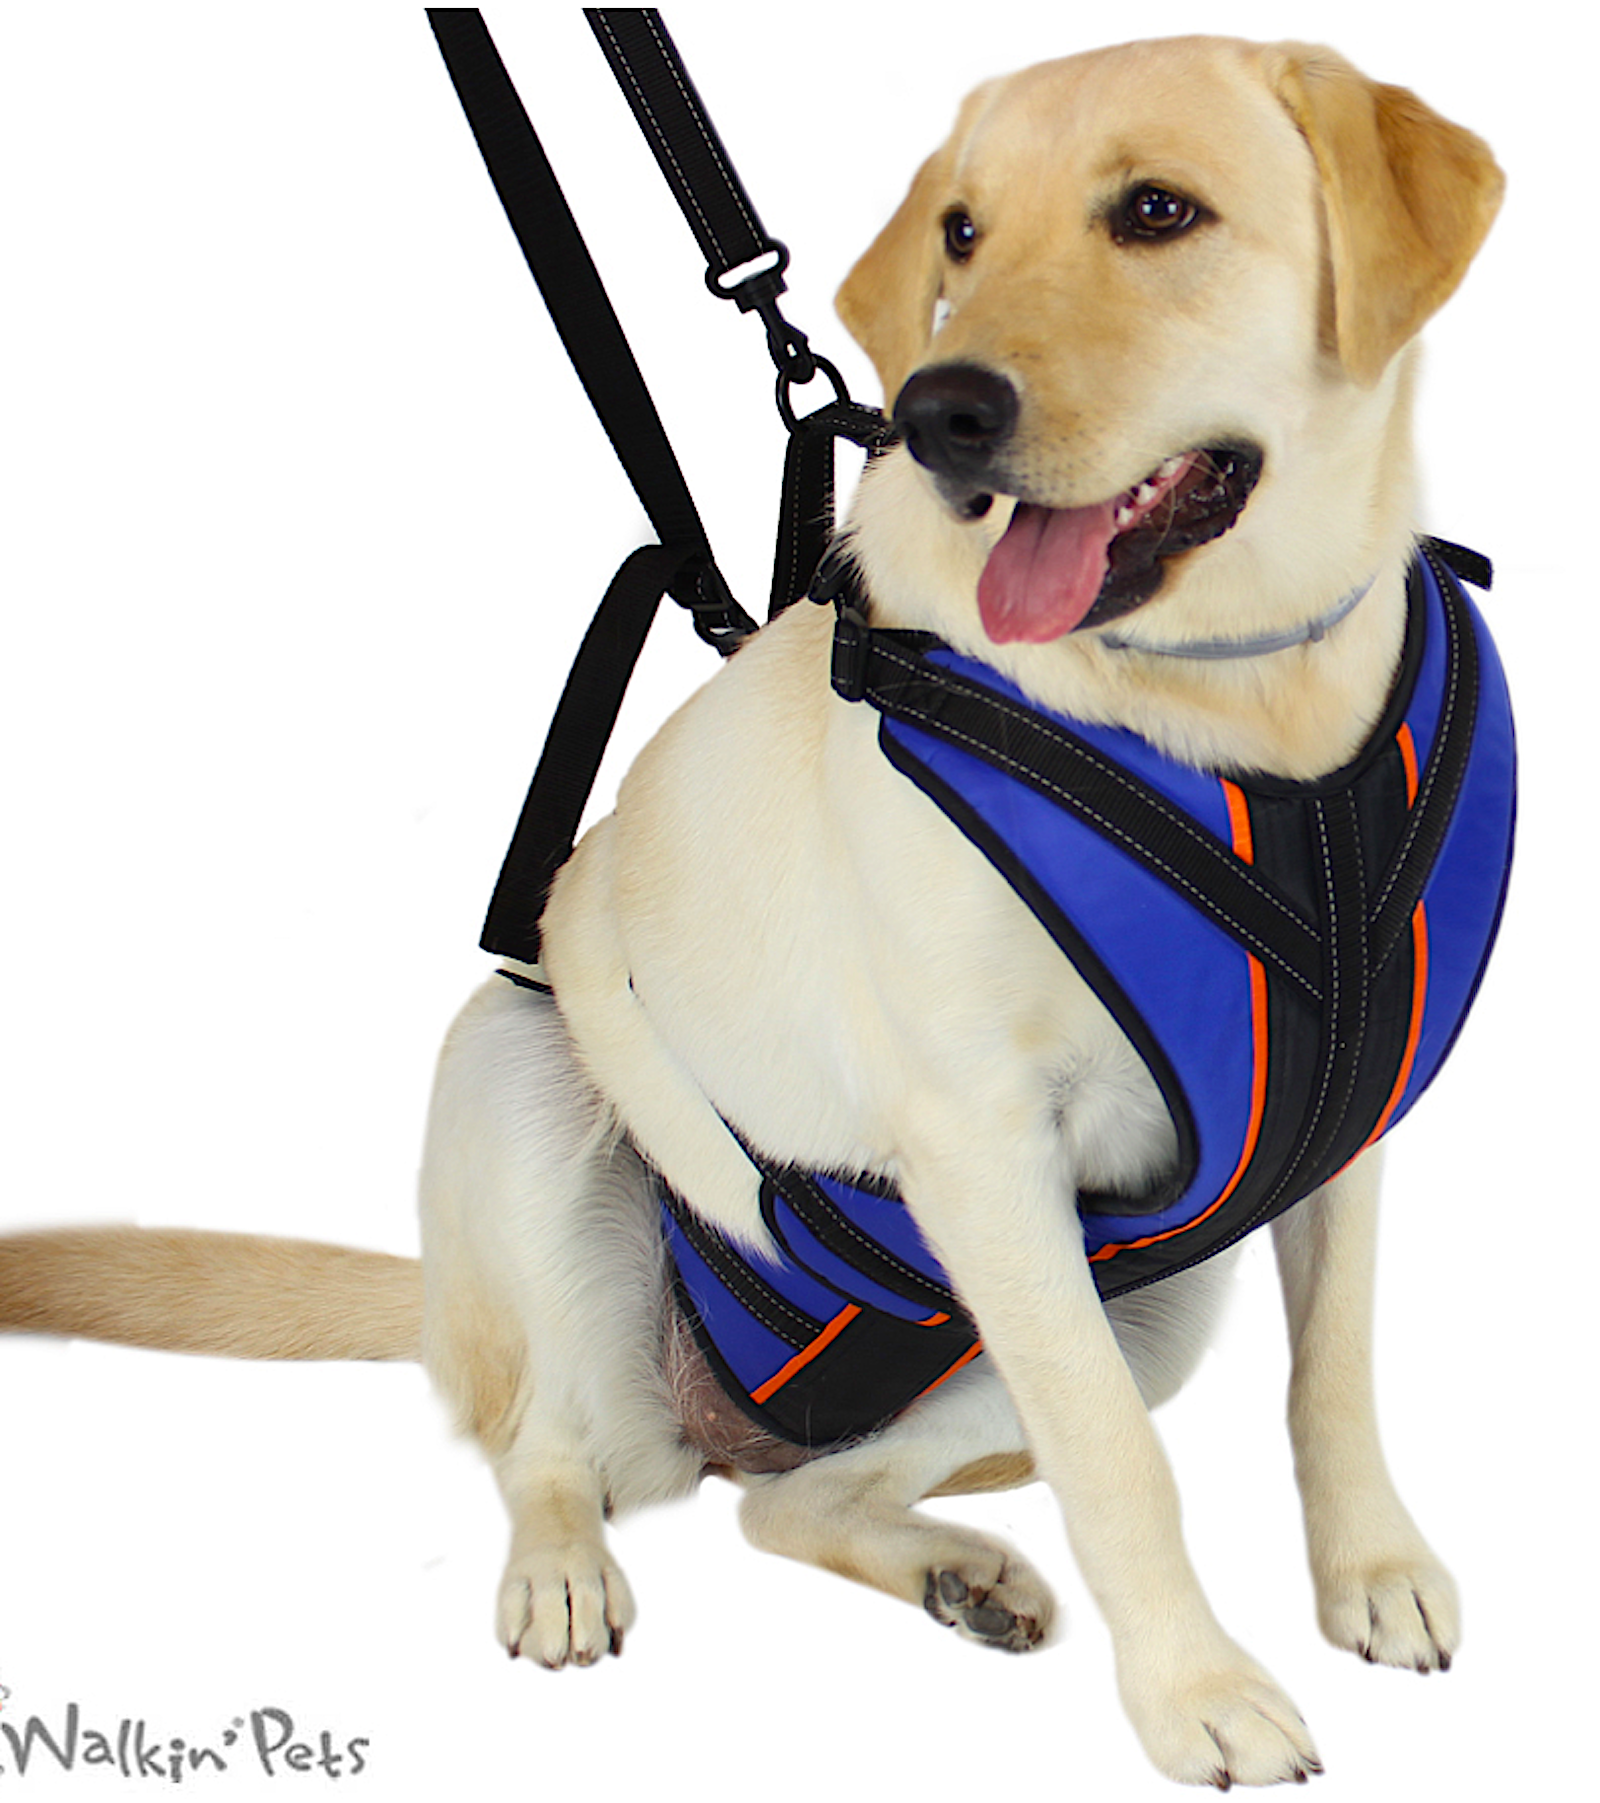 WALKIN' PETS HARNESSES & SLINGS: help your pets regain mobility and independence - Vital Vet